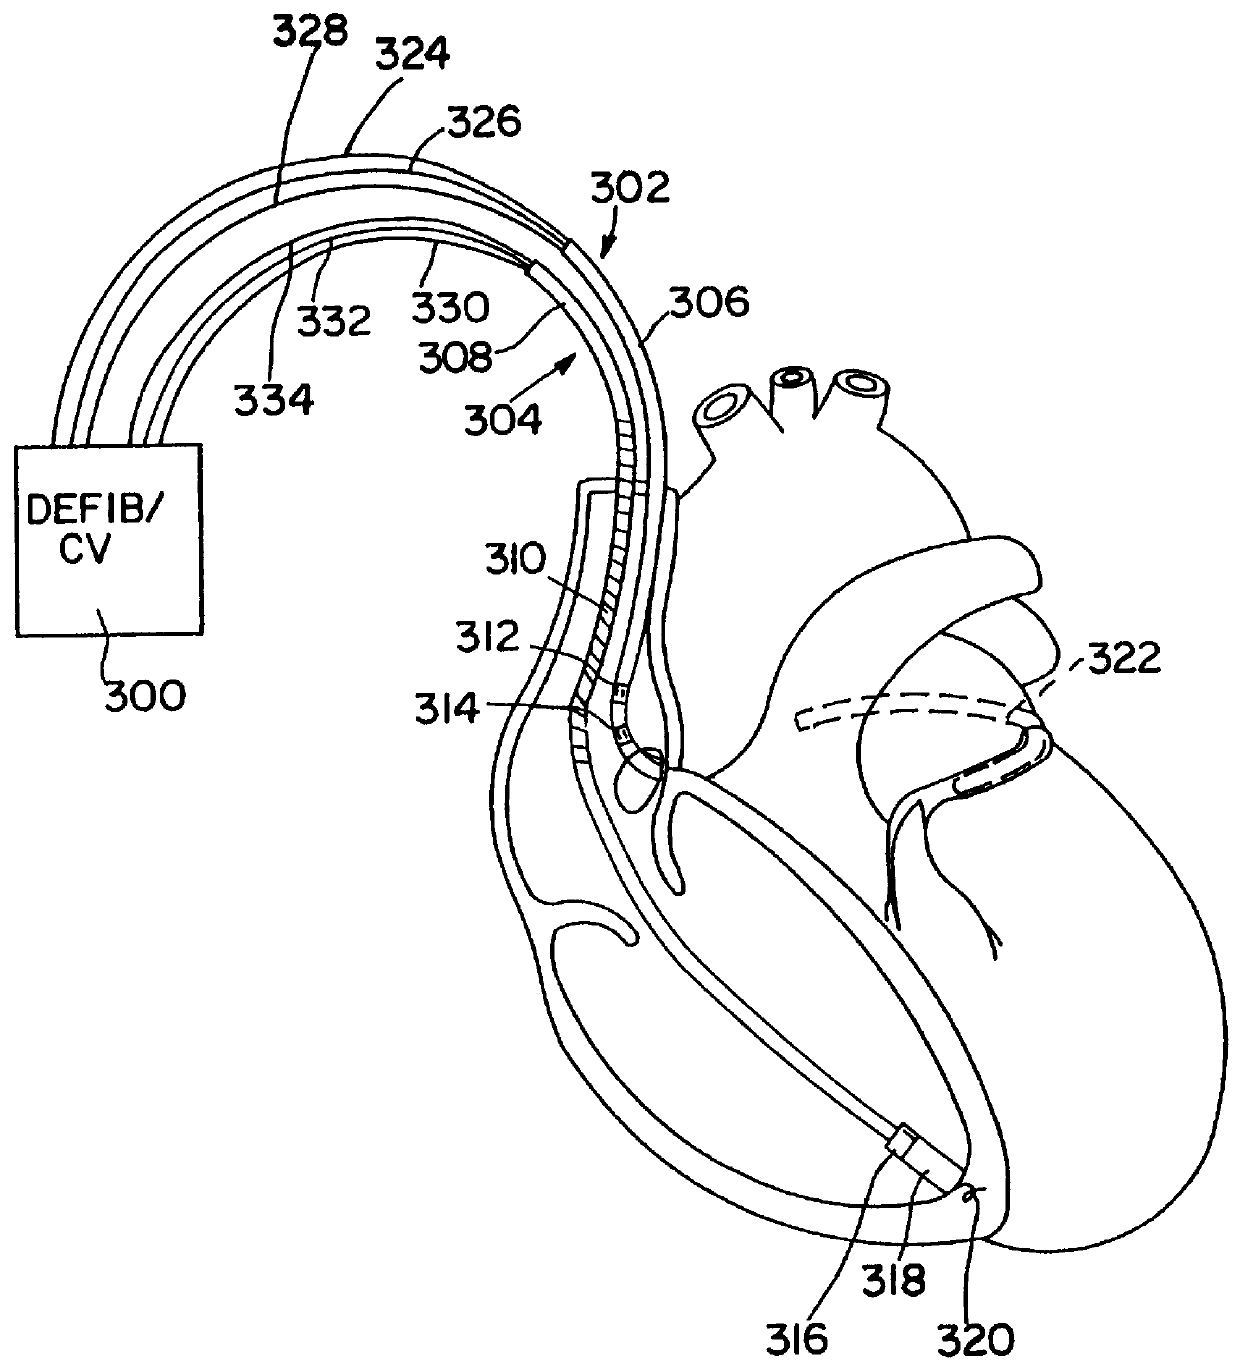 Method and apparatus for synchronization of atrial defibrillation pulses